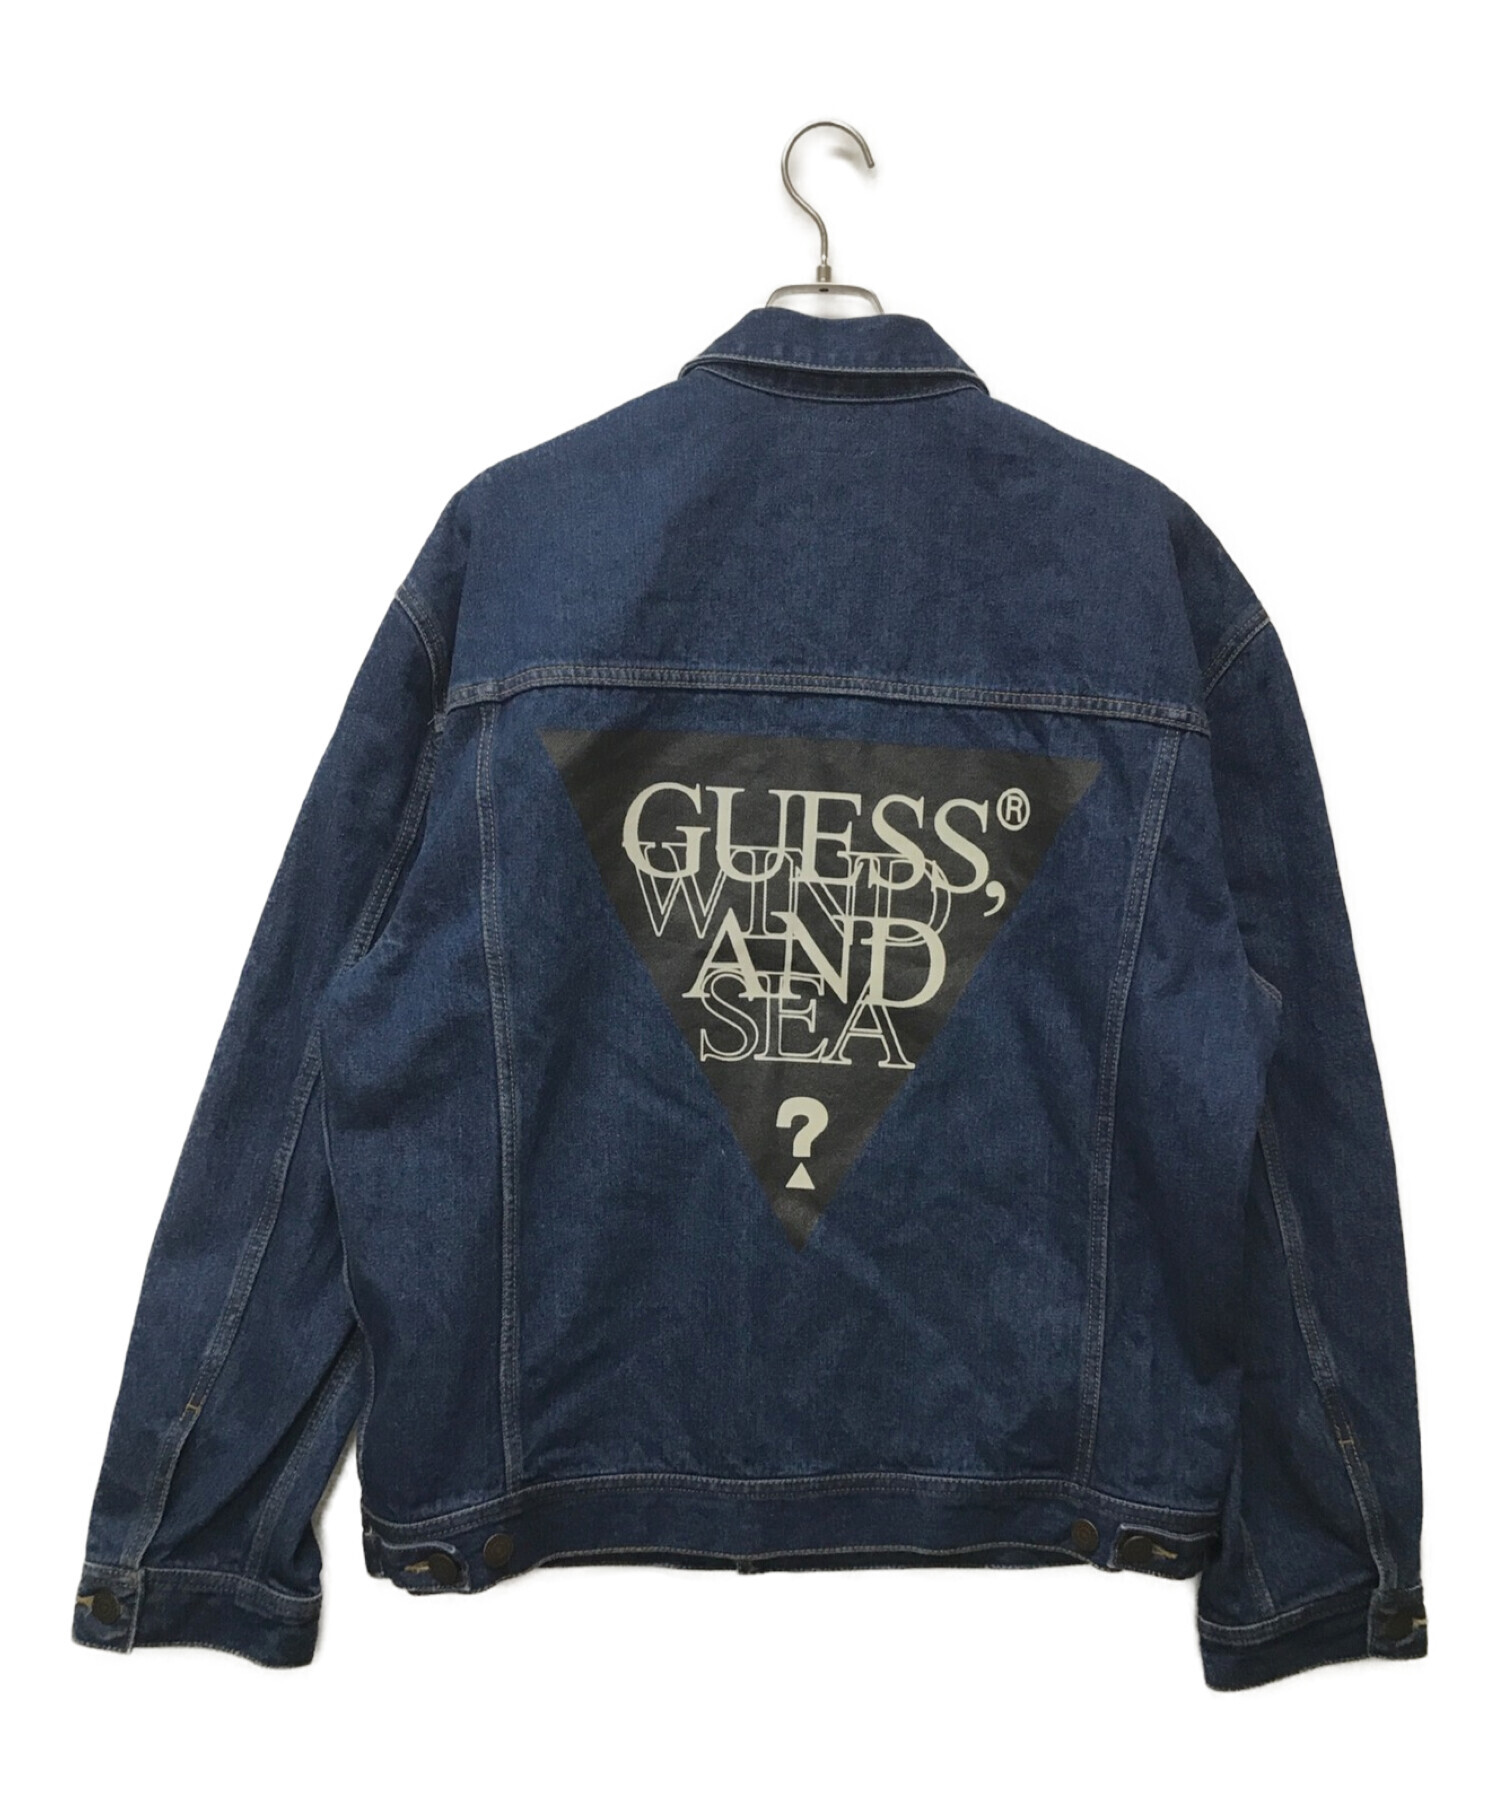 WIND AND SEA GUESS Denim Jacket size XL肩幅59cm - Gジャン/デニム